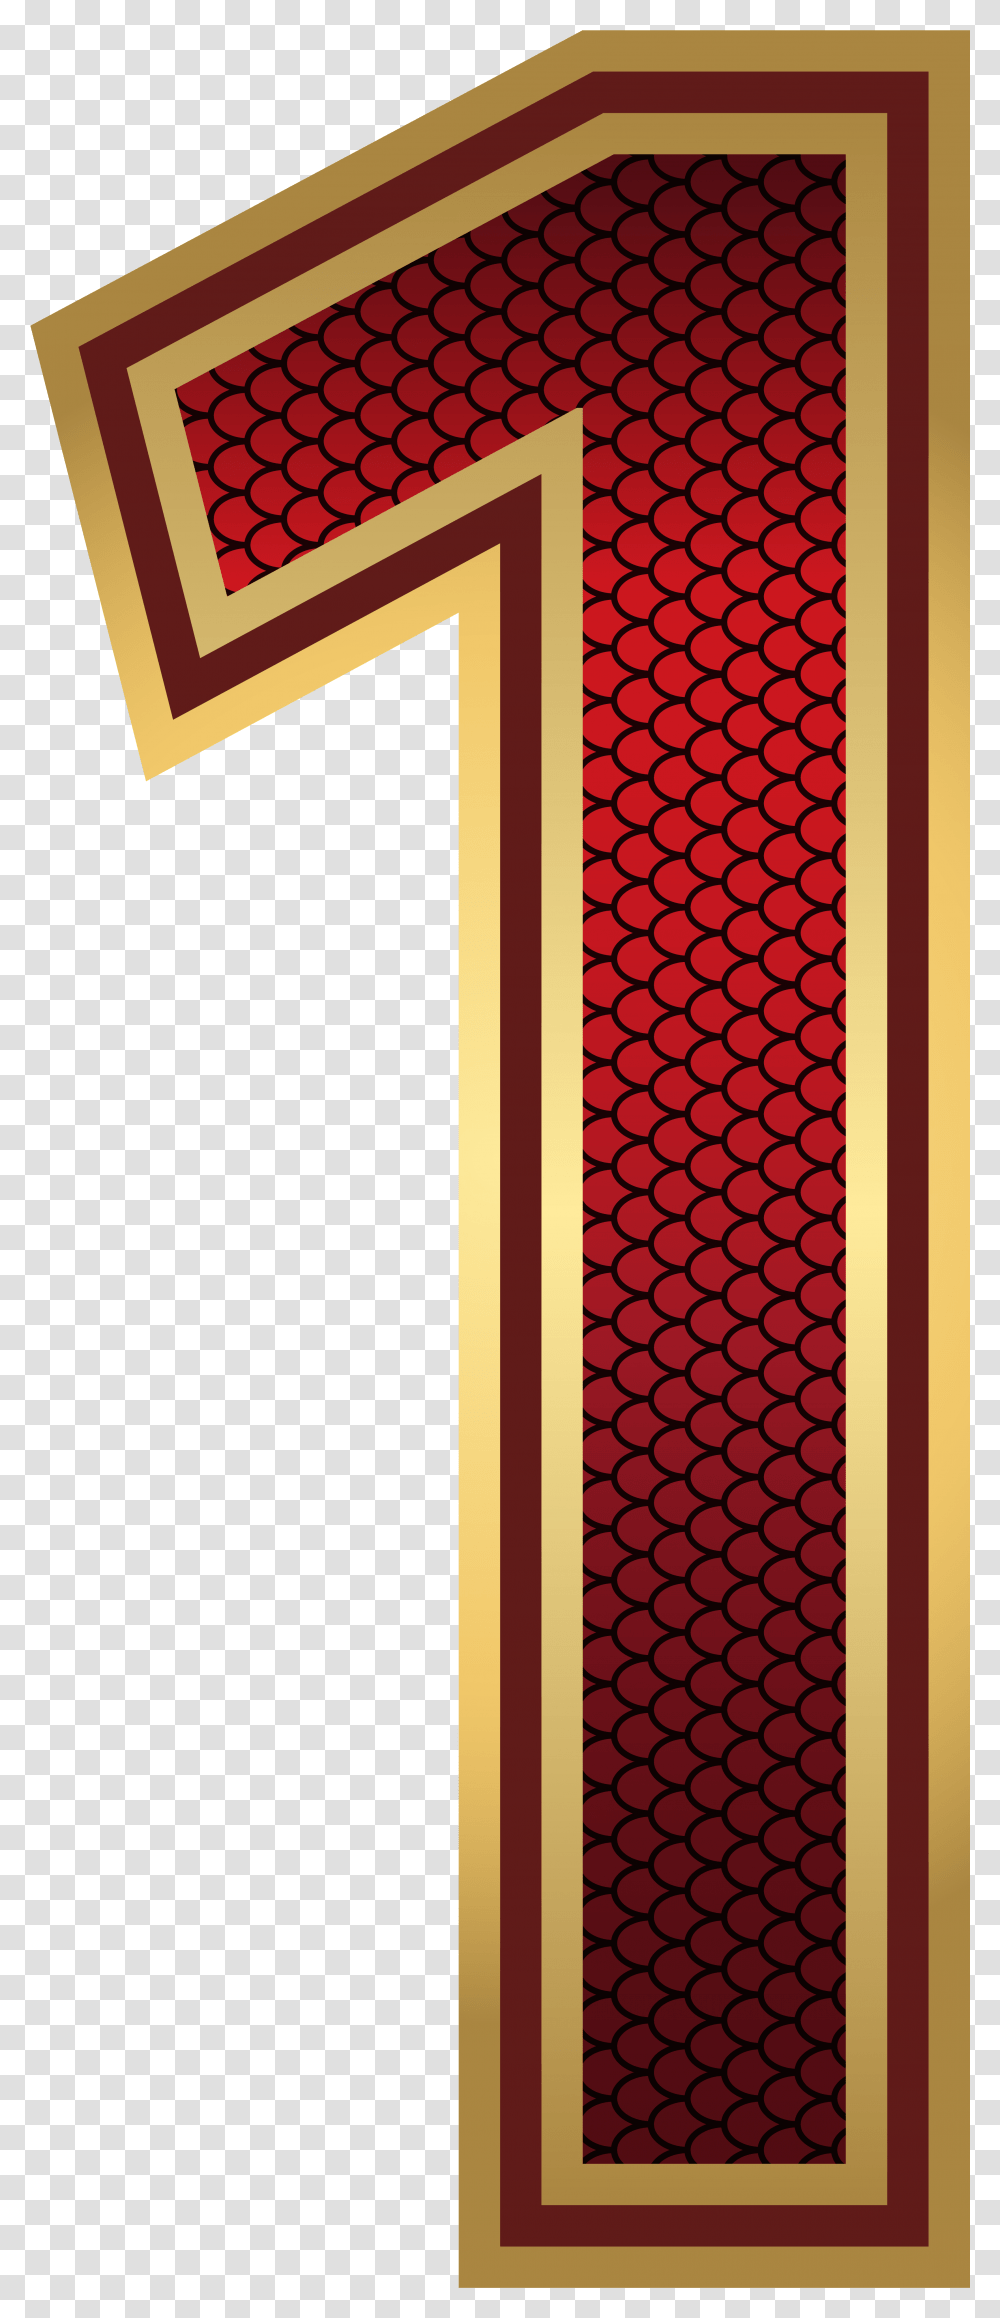 Red And Gold Number One Image Background Number 1 1, Cross, Tie, Accessories Transparent Png